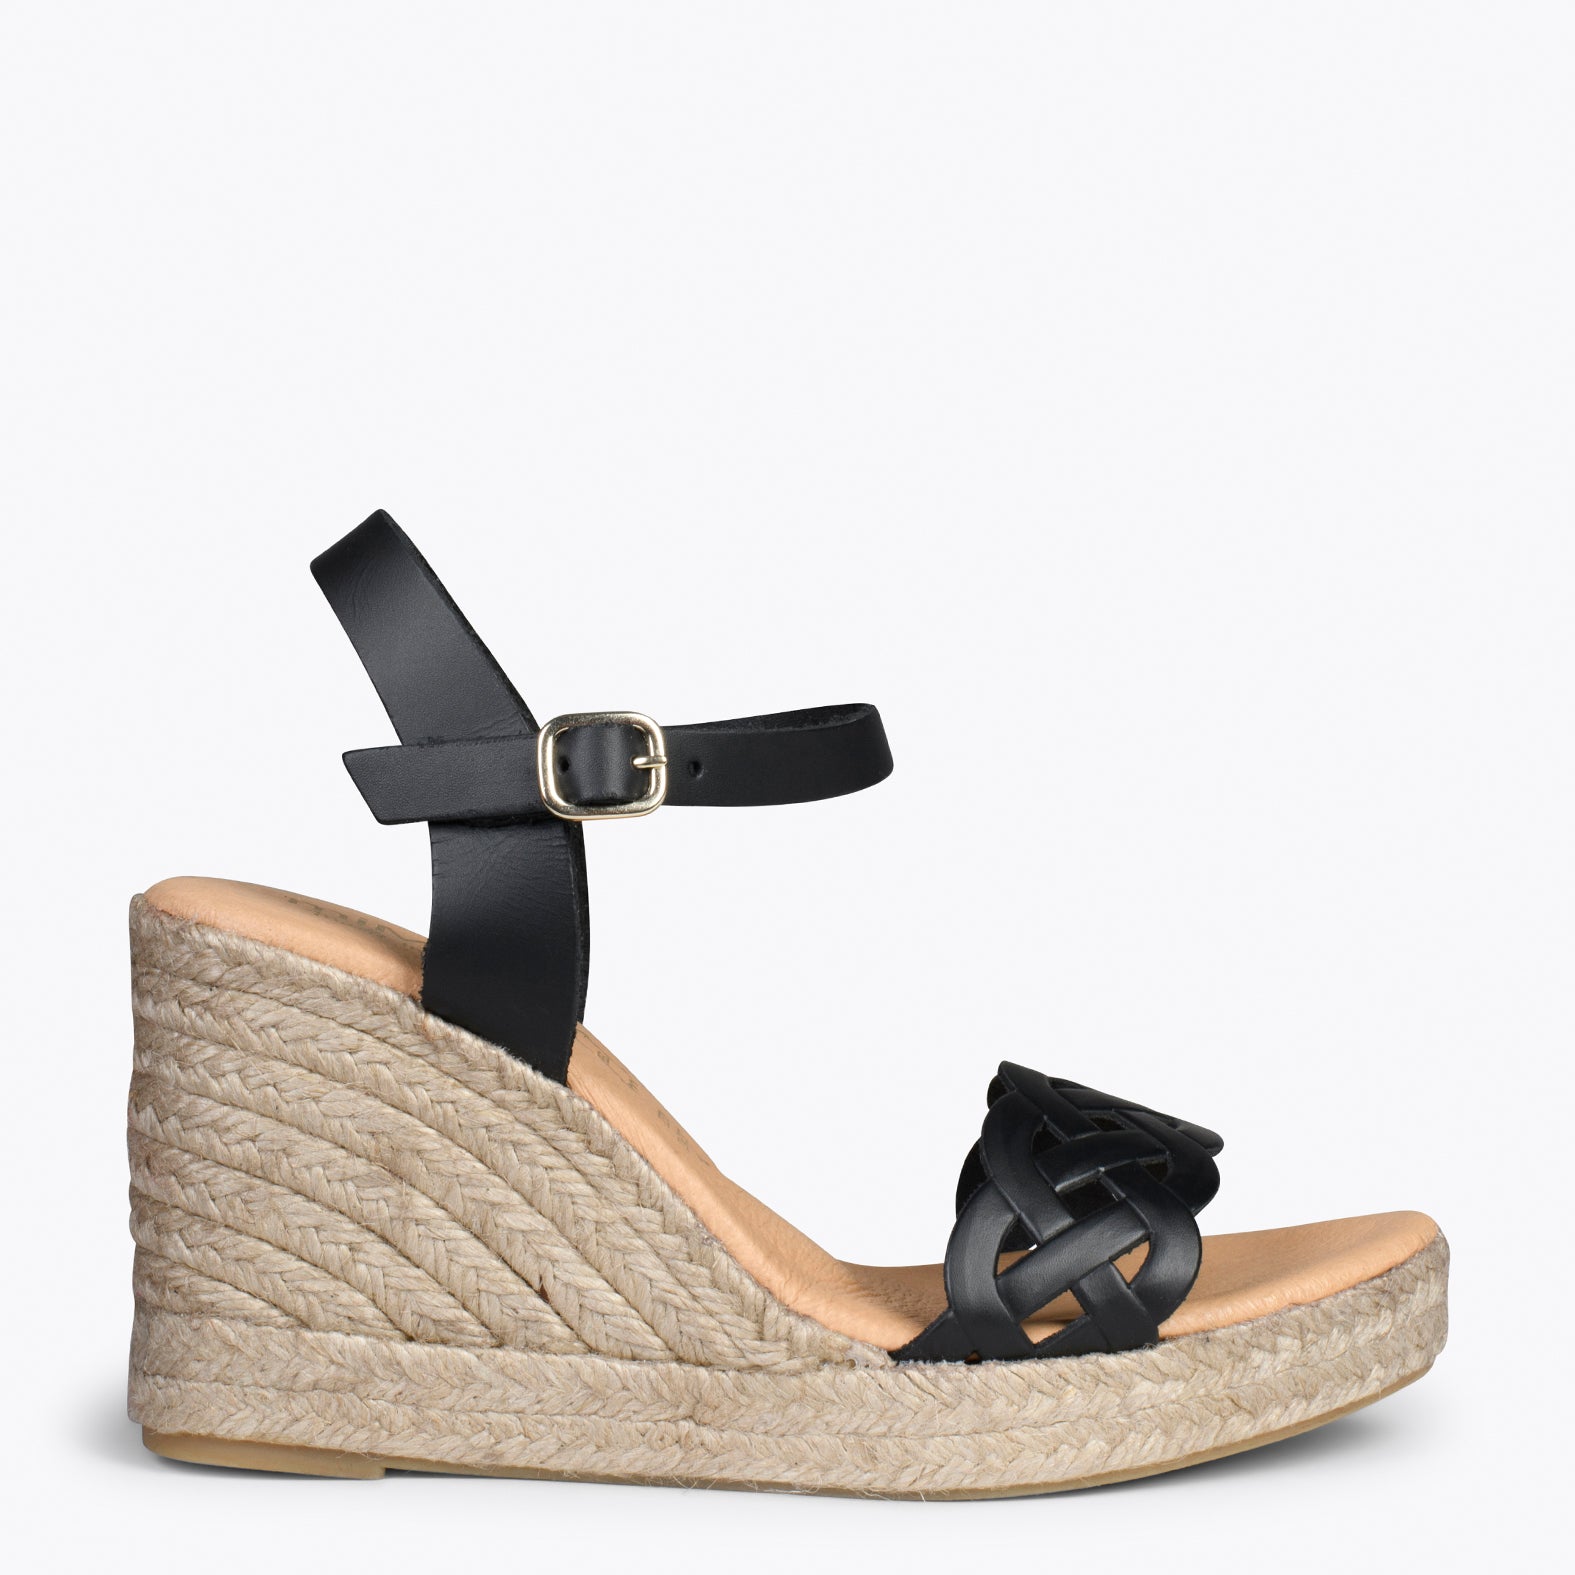 OASIS – BLACK espadrille wedges with braided front